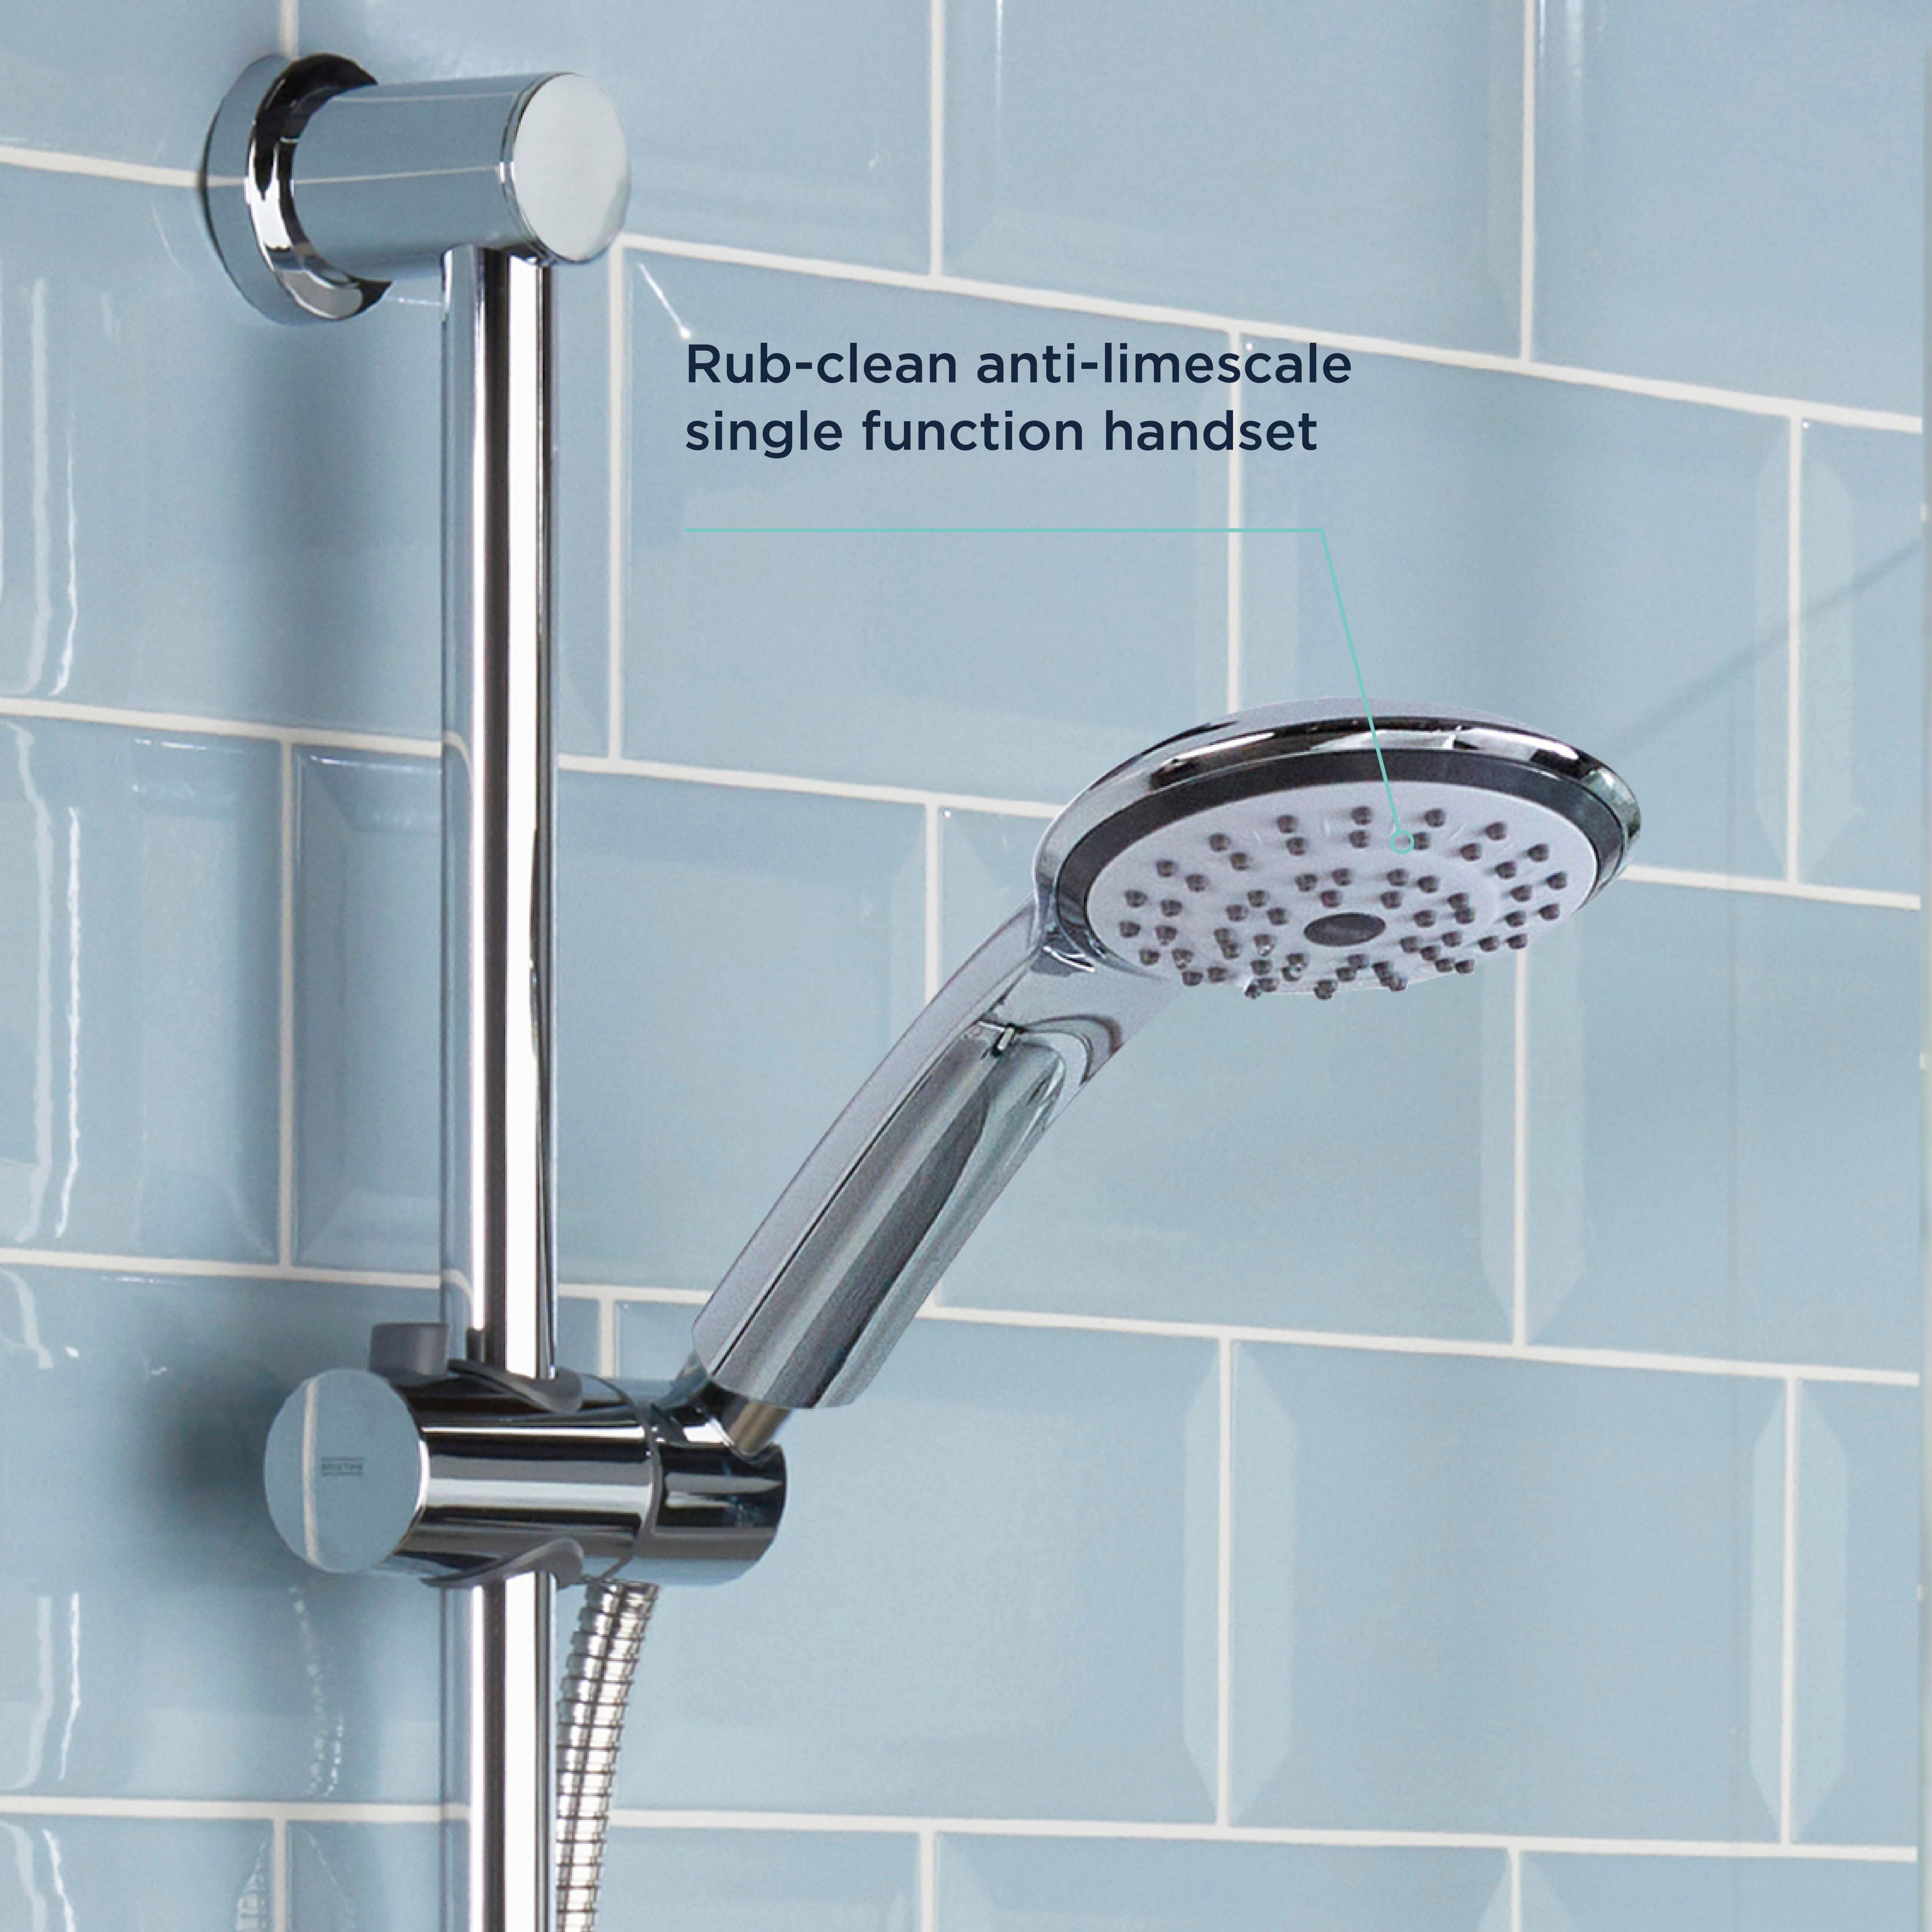 Bristan Divine Gloss Chrome effect Wall-mounted Thermostatic Mixer shower